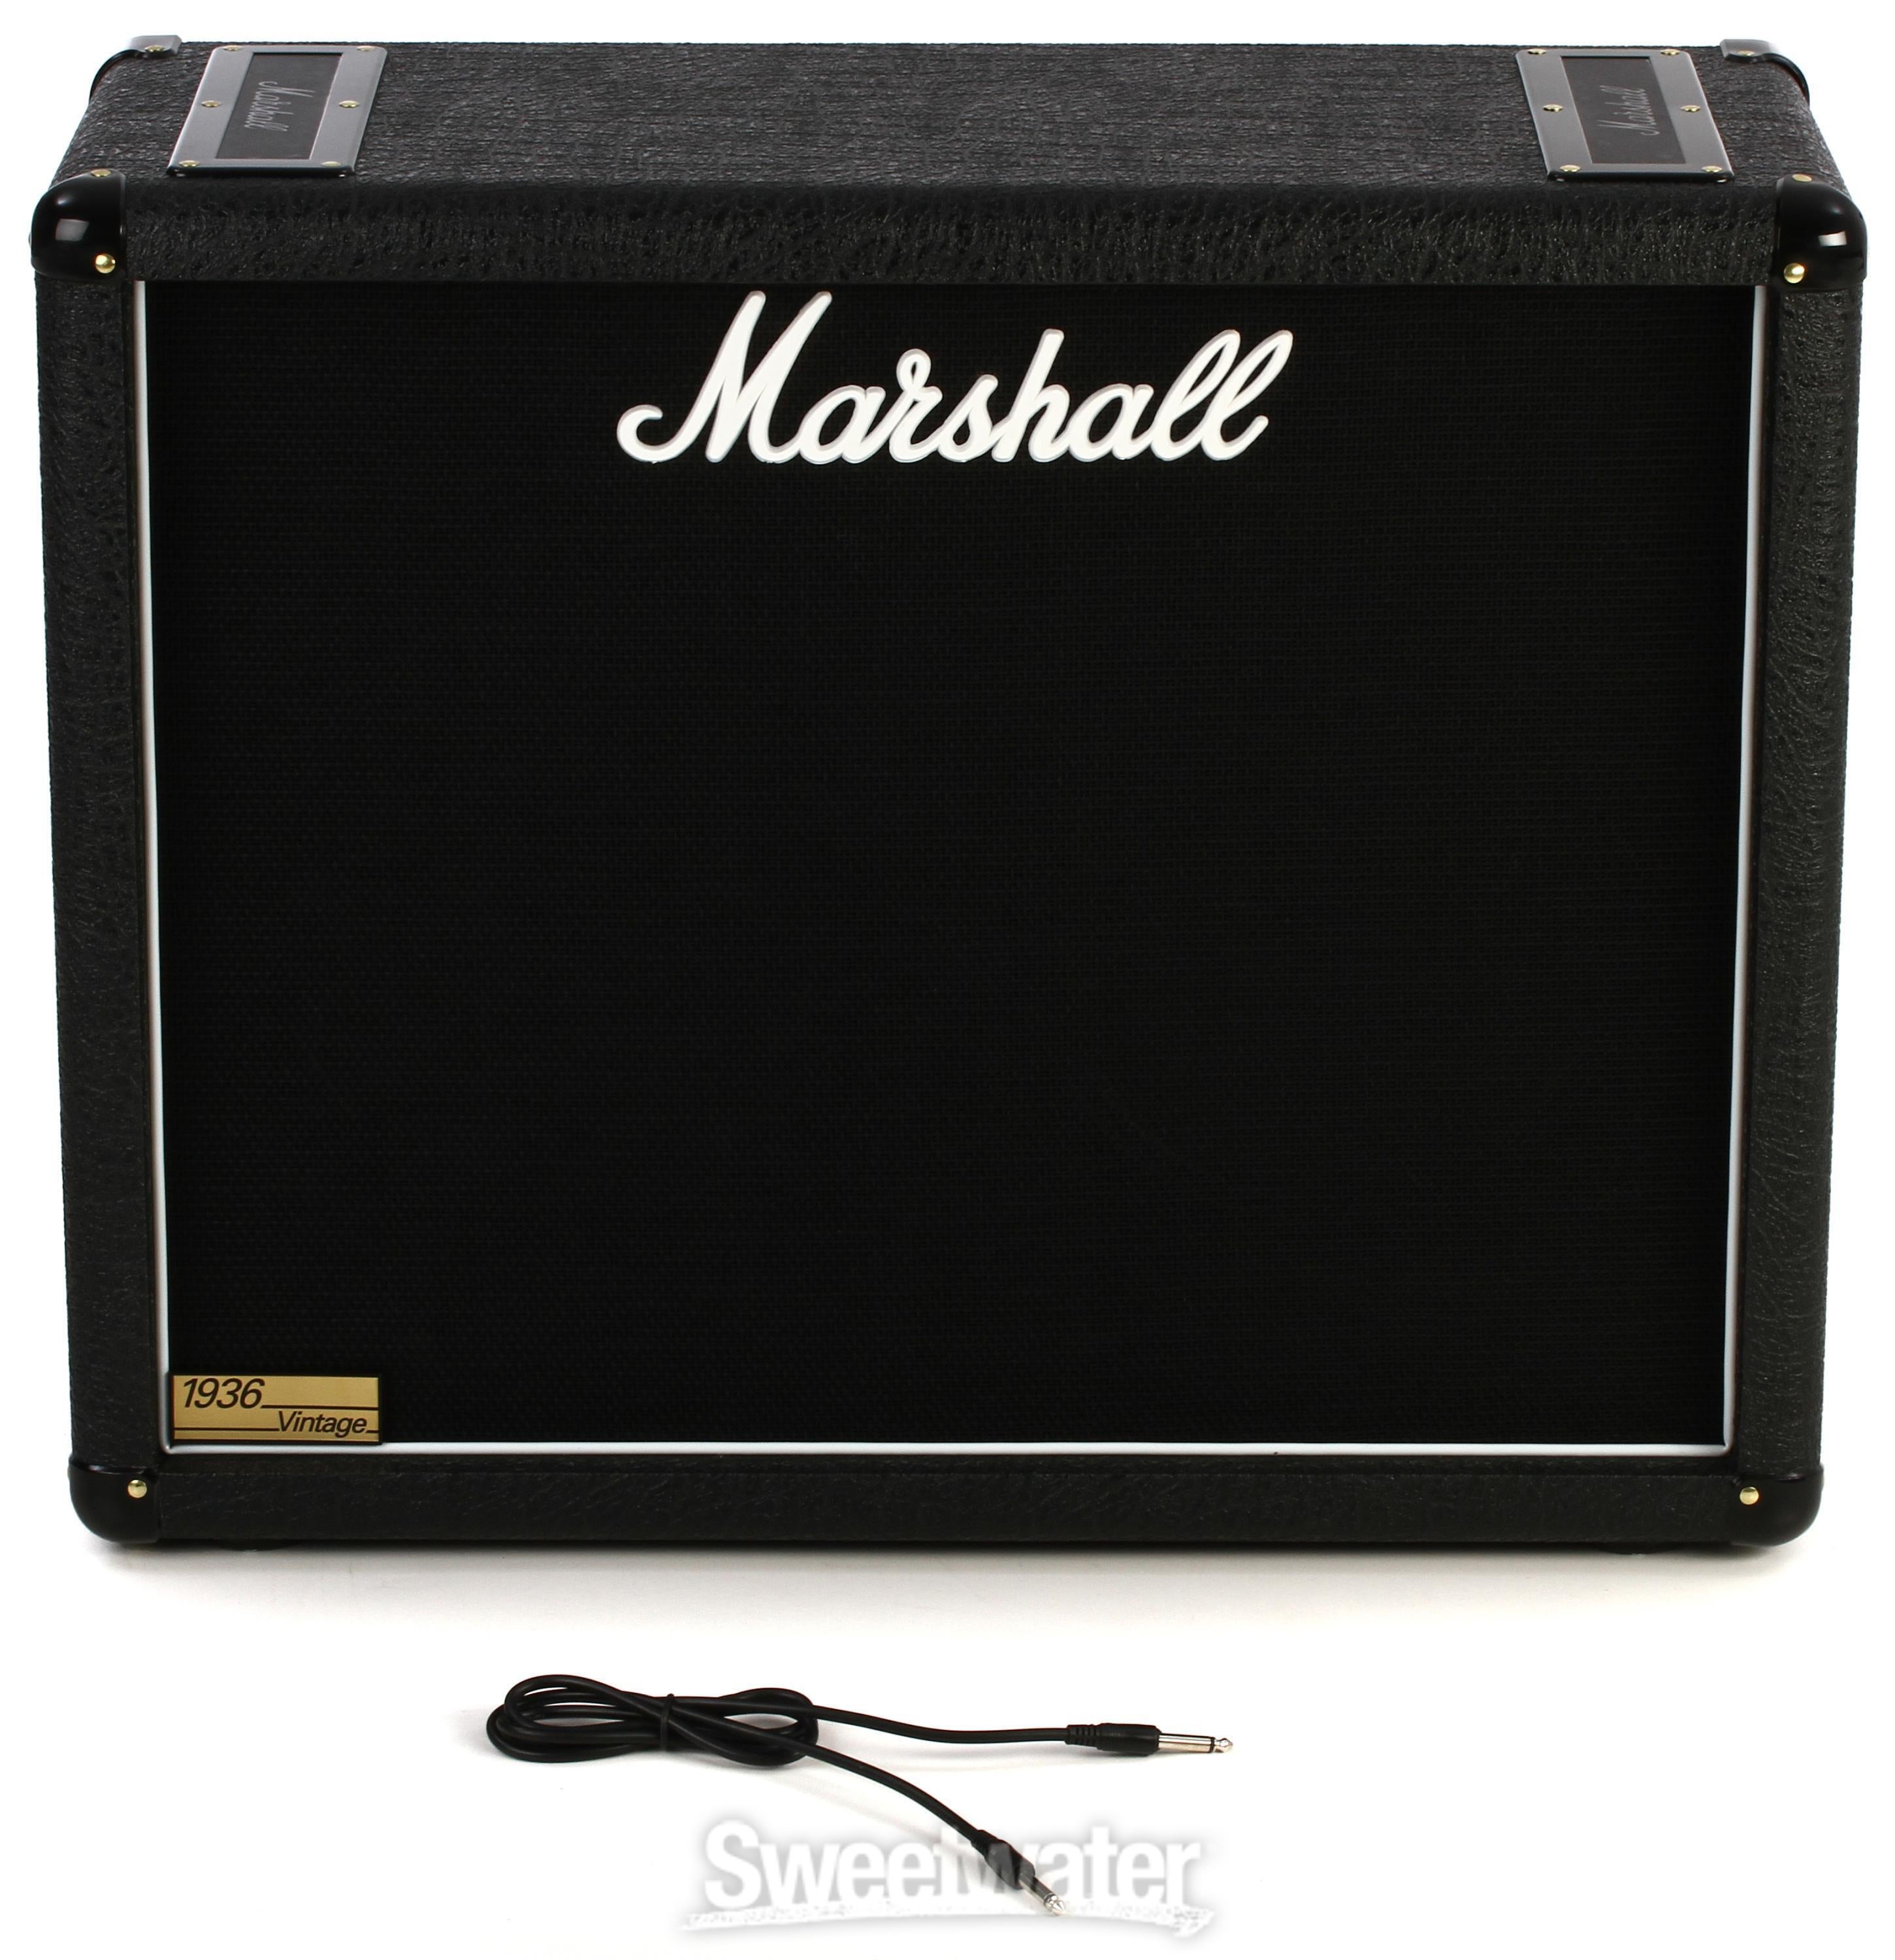 Marshall 1936V 140-watt 2x12 Extension Cabinet with G12 Vintage |  Sweetwater